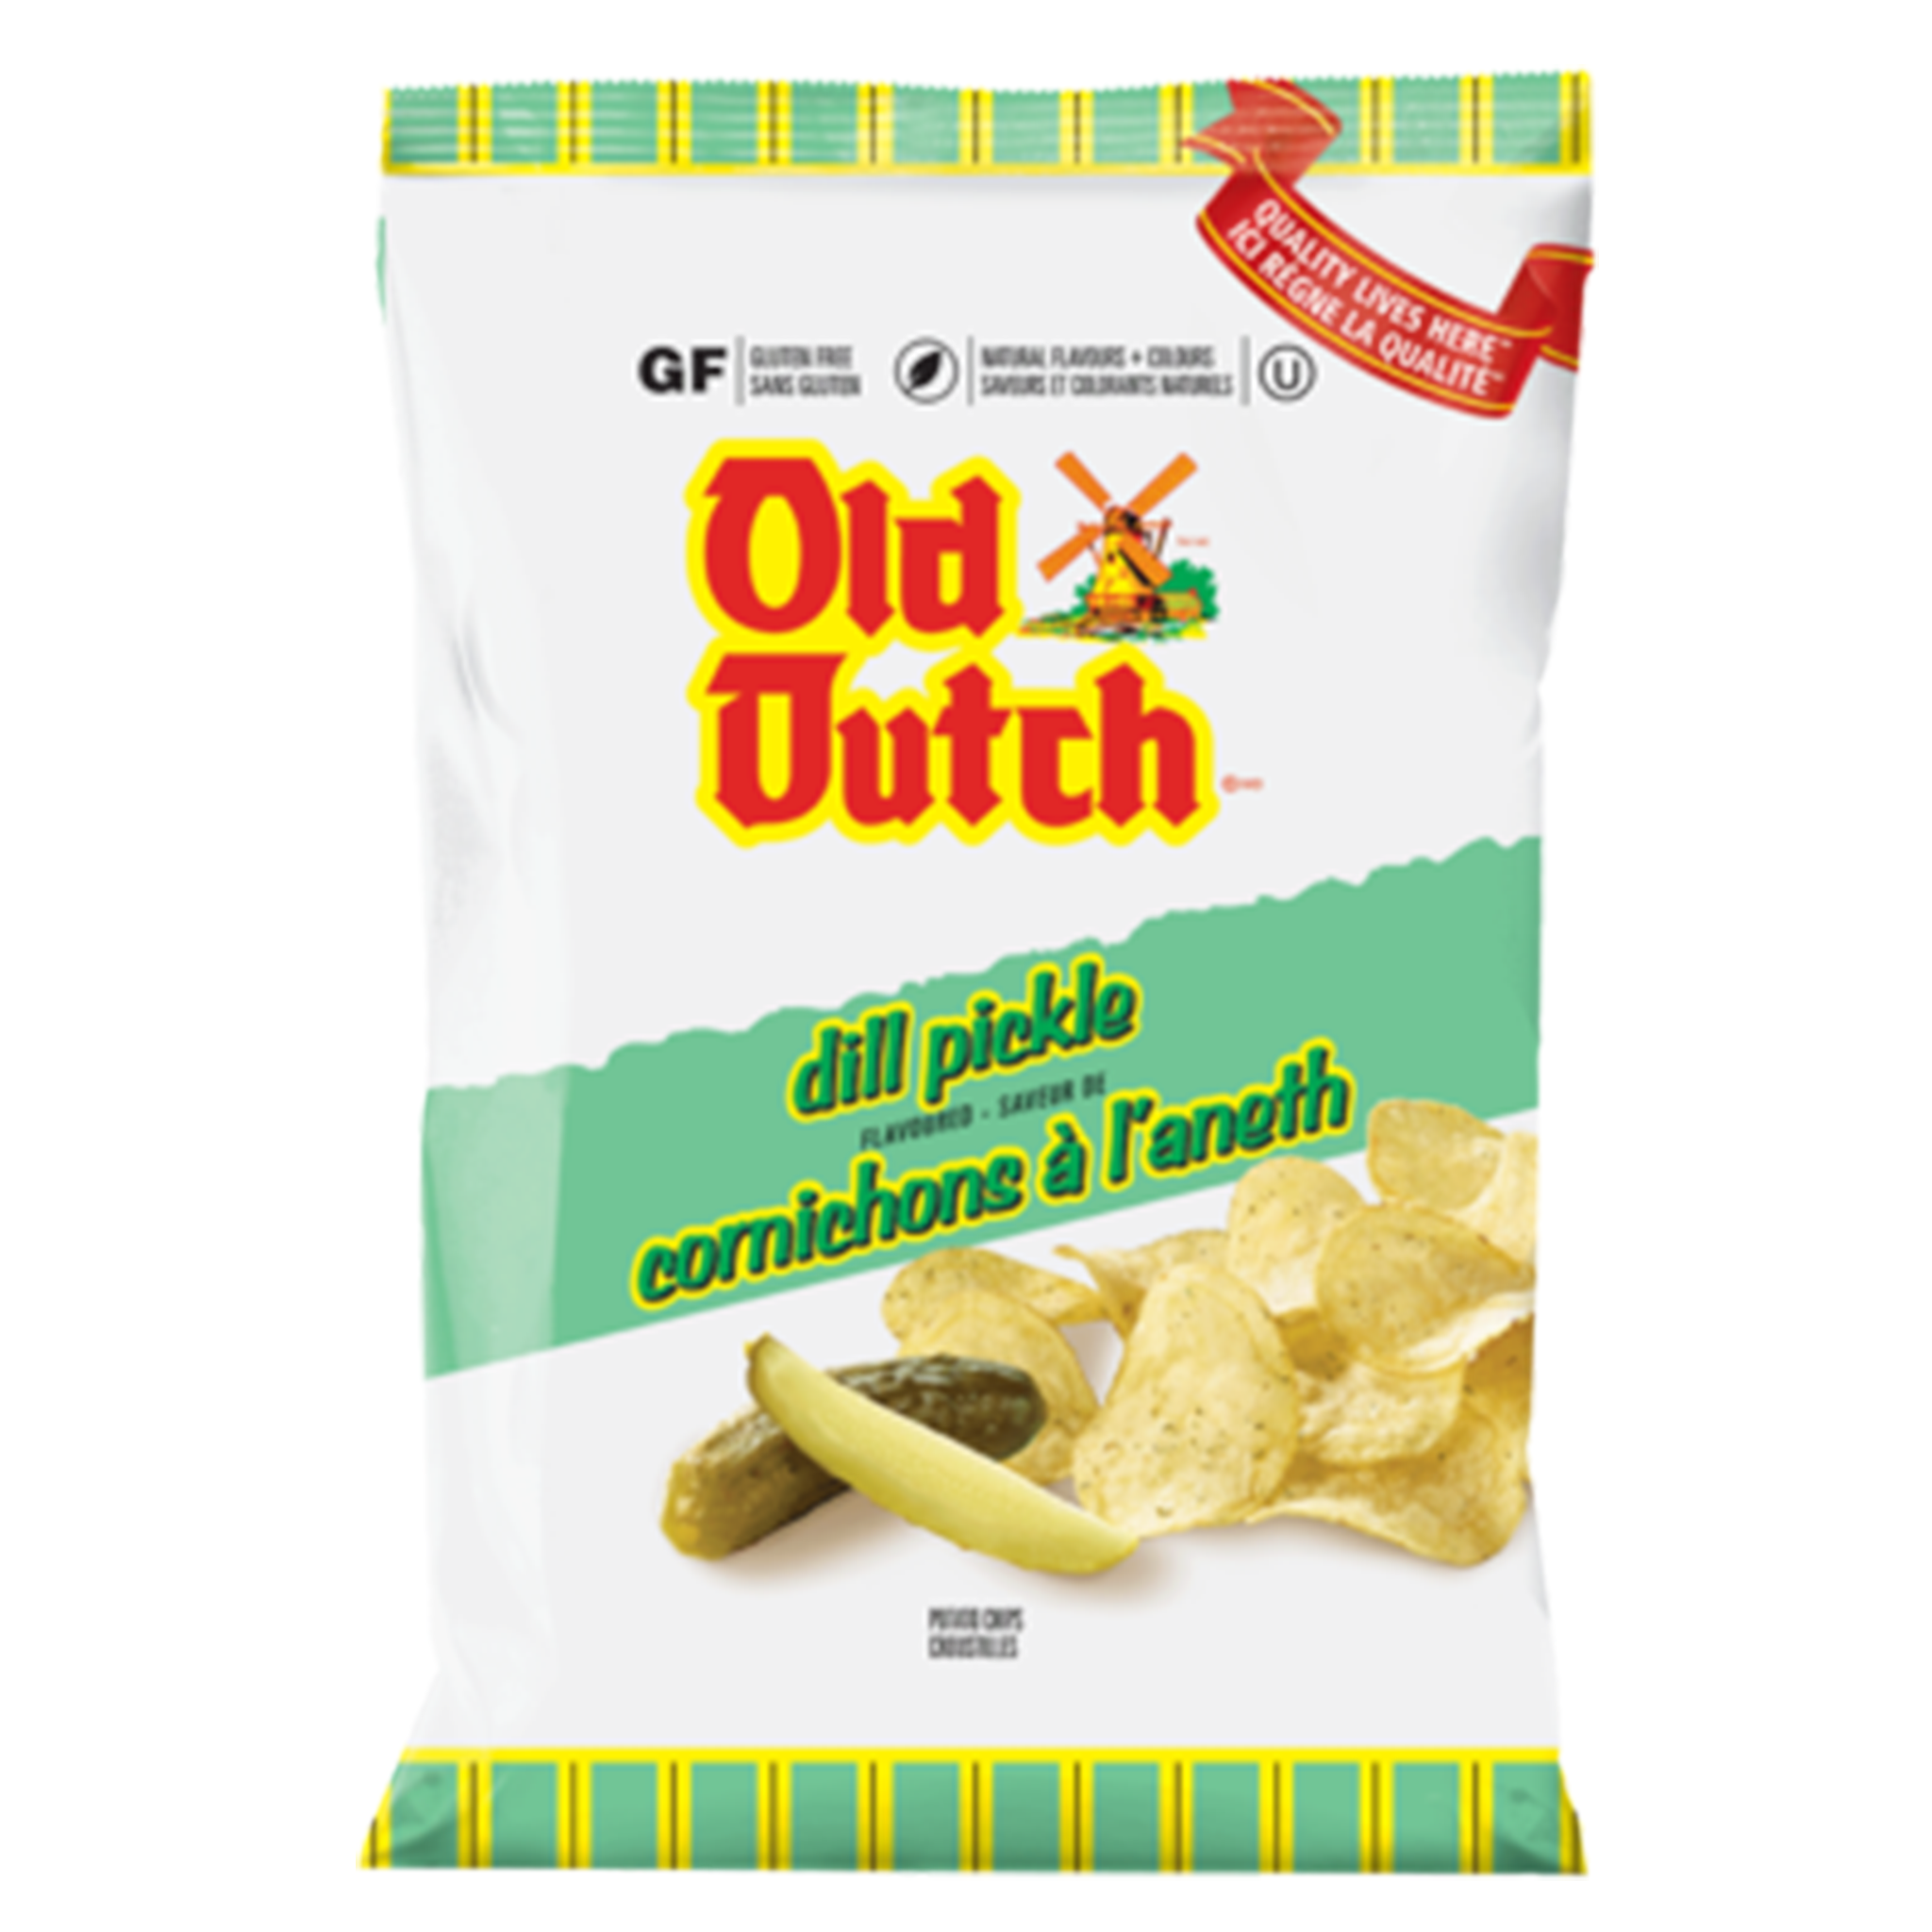 Old Dutch - Dill Pickle